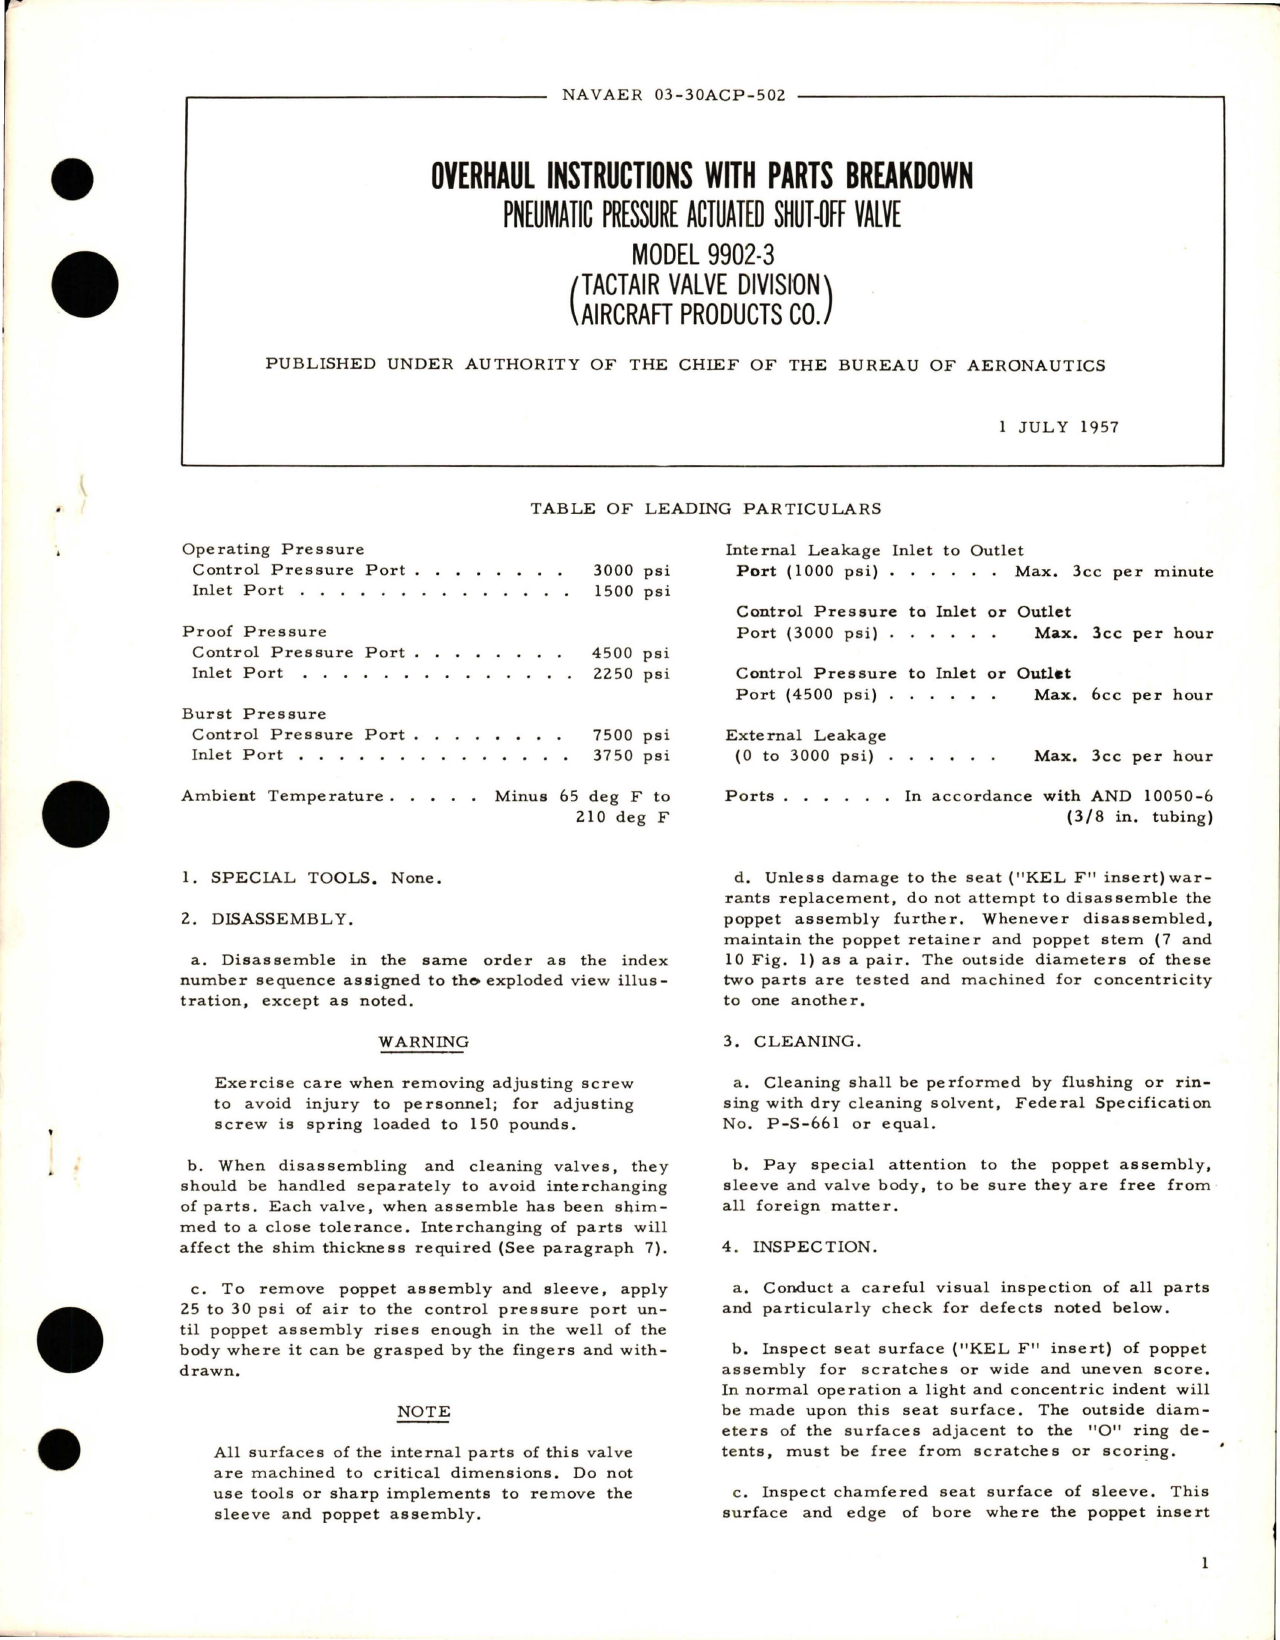 Sample page 1 from AirCorps Library document: Overhaul Instructions with Parts Breakdown for Pneumatic Pressure Actuated Shut-Off Valve - Model 9902-3